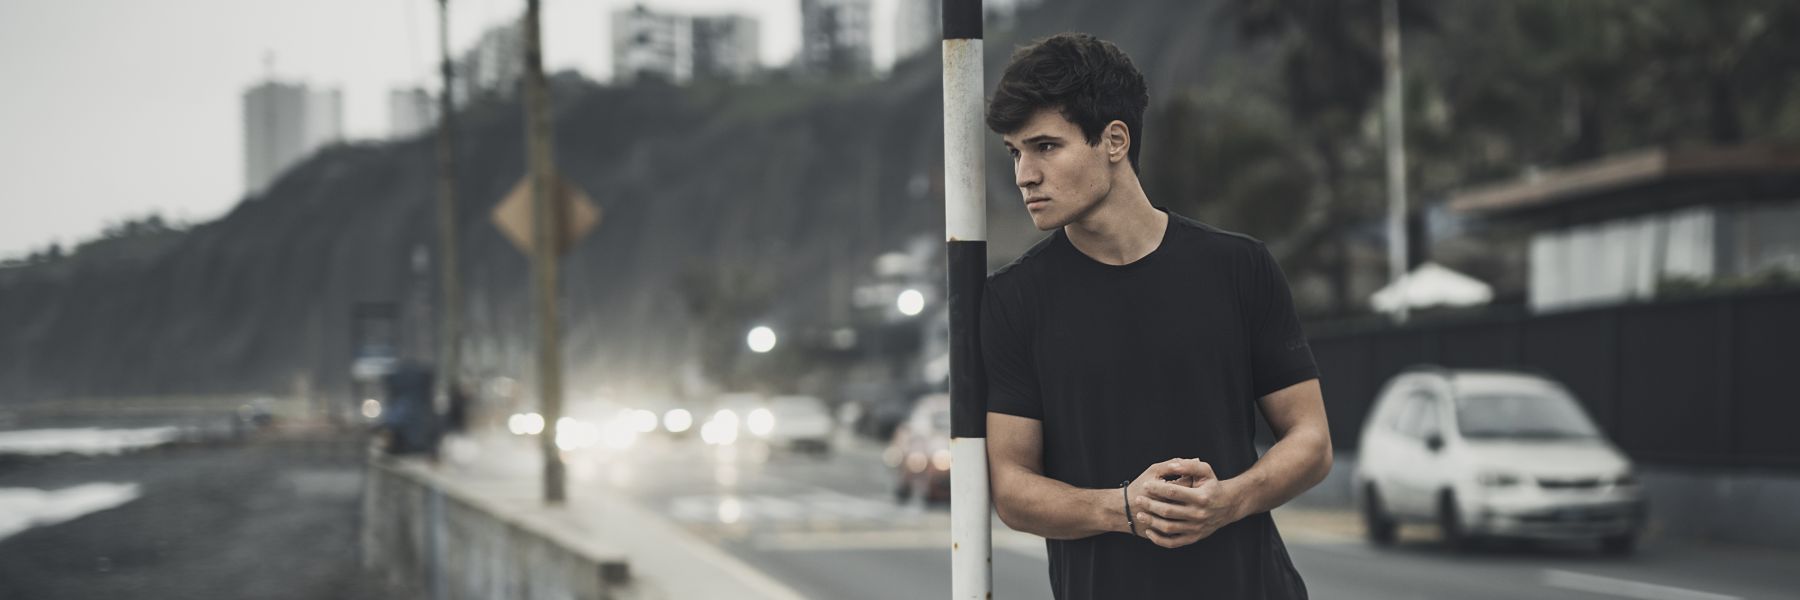 Wincent Weiss Irgendwie Anders Tour 2019